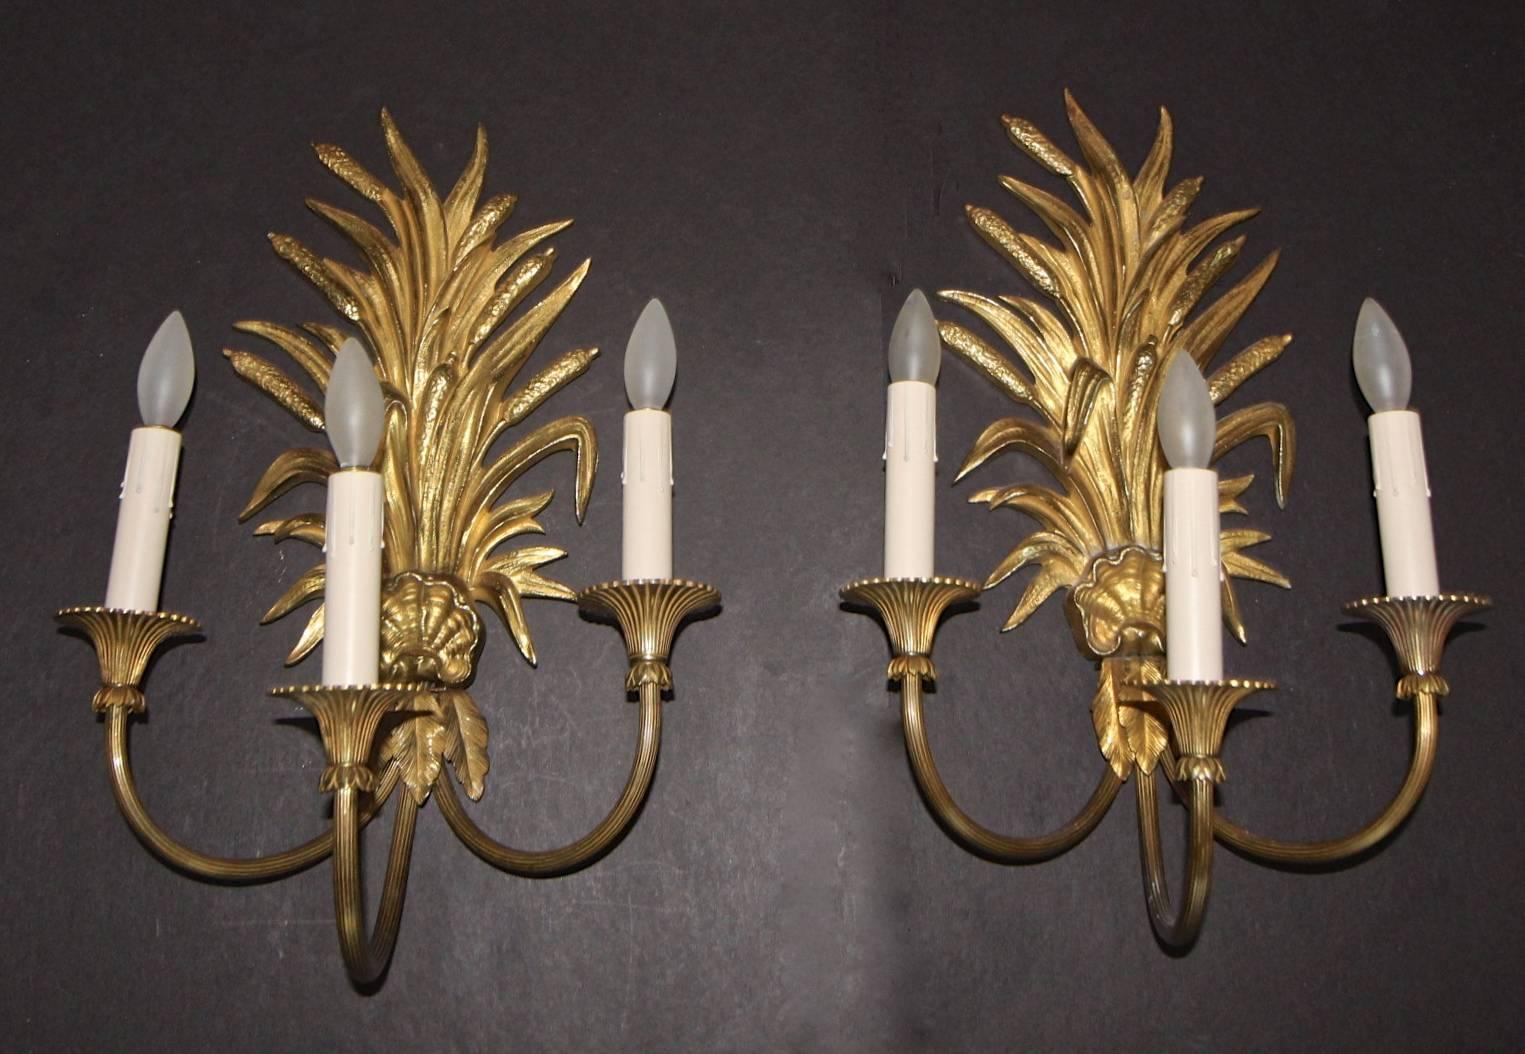 Fabulous pair of gilt bronze three-arm wall sconces, finely detailed wheat sheath and shell motif by Maison Charles. Style 